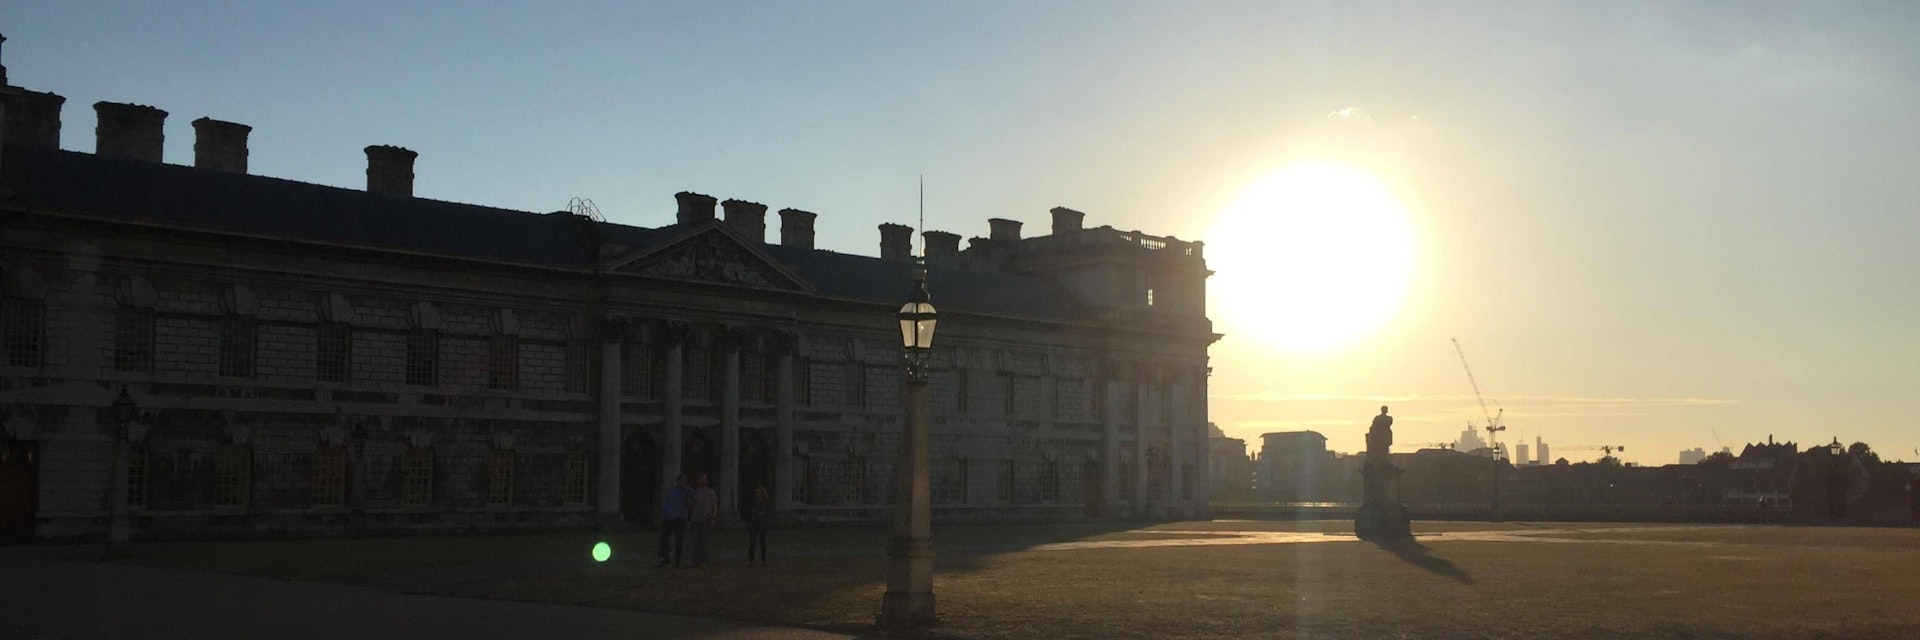 Old Royal Naval College exterior